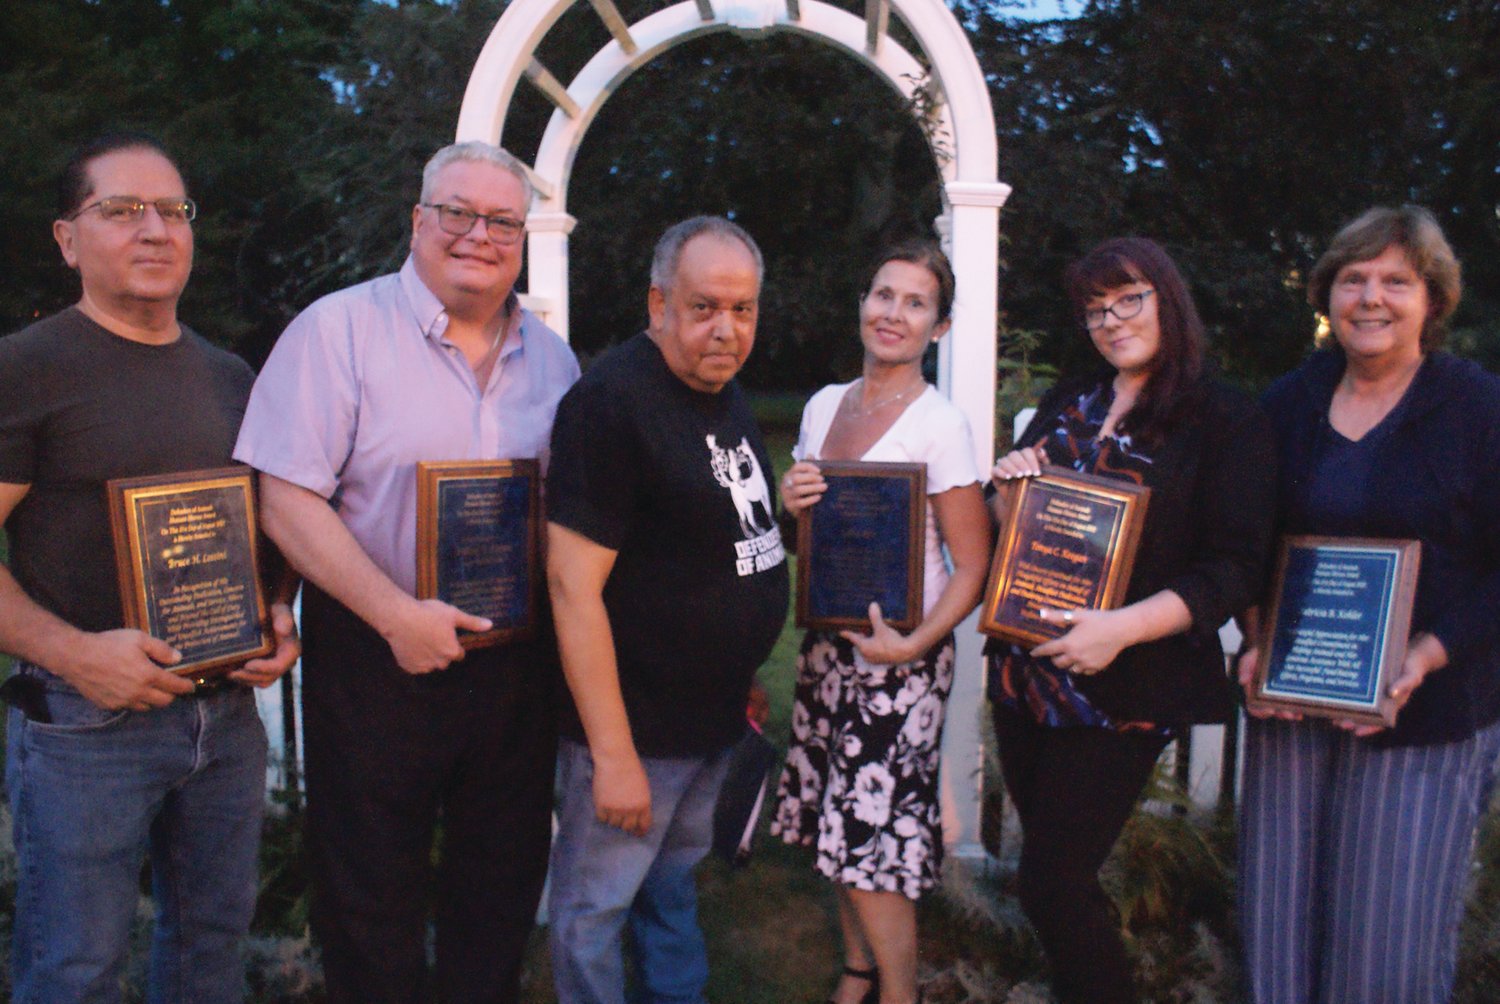 AWARD WINNERS: Dennis Tabella, director of Defenders of Animals, poses with the five individuals who received Humane Hero awards at the 27th annual Homeless Animals Day/Candlelight Vigil on Aug. 21 at Sprague Mansion in Cranston. He is joined by, from left, Bruce Lossini, William W. O’Brien, Robin Aptt, Tonya C. Keegan and Patricia Kohler.